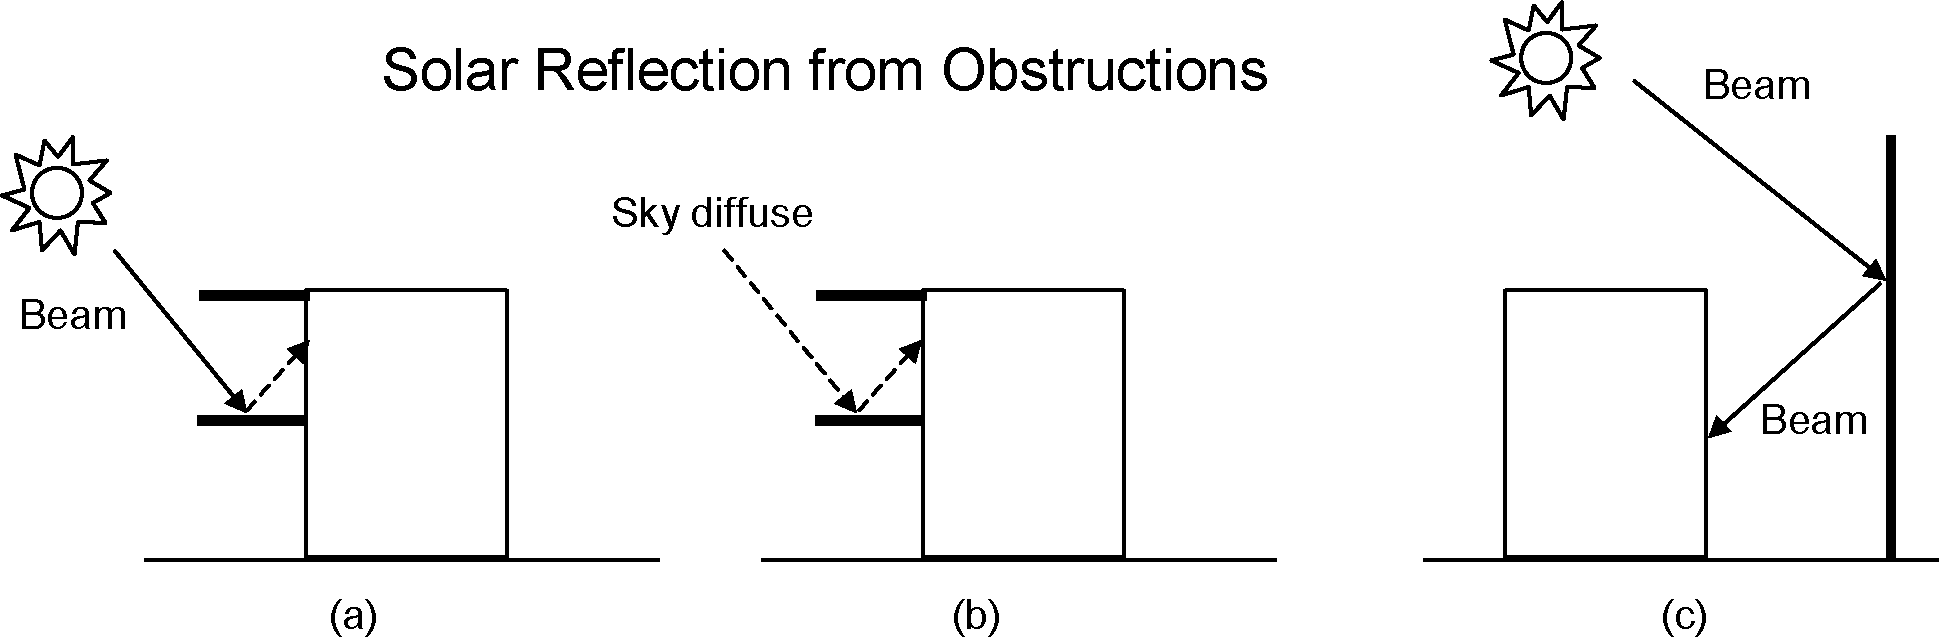 Examples of solar reflection from shadowing surfaces in the Shading series of input objects. Solid arrows are beam solar radiation; dashed arrows are diffuse solar radiation. (a) Diffuse reflection of beam solar radiation from the top of an overhang. (b) Diffuse reflection of sky solar radiation from the top of an overhang. (c) Beam-to-beam (specular) reflection from the facade of an adjacent highly-glazed building represented by a vertical shadowing surface.